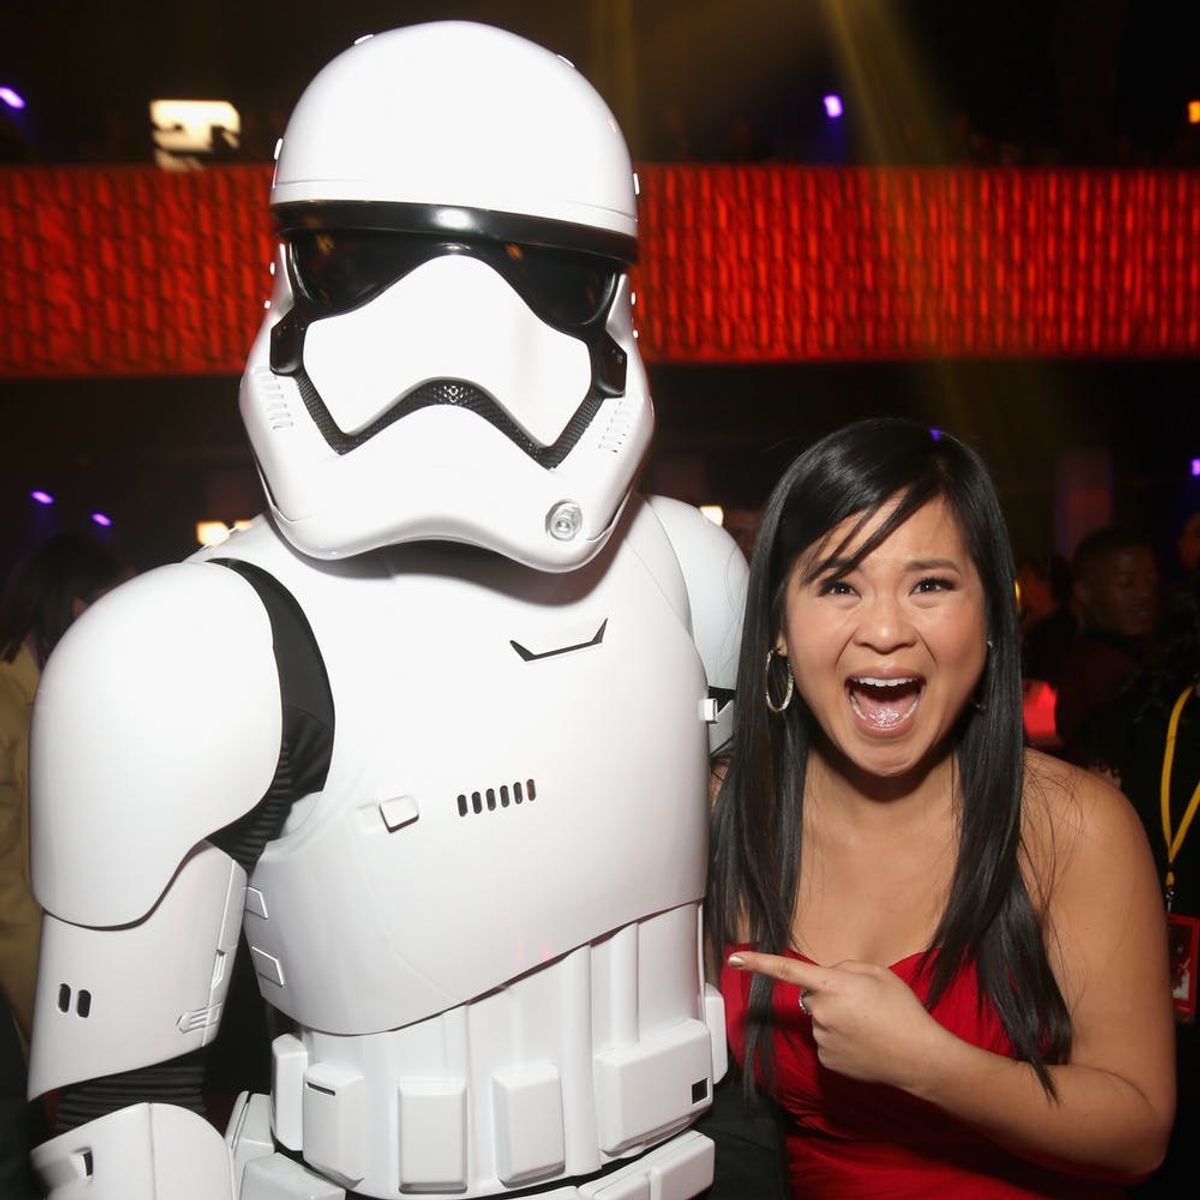 12 Reasons Why “The Last Jedi” Star Kelly Marie Tran Is the IRL Hero We All Need